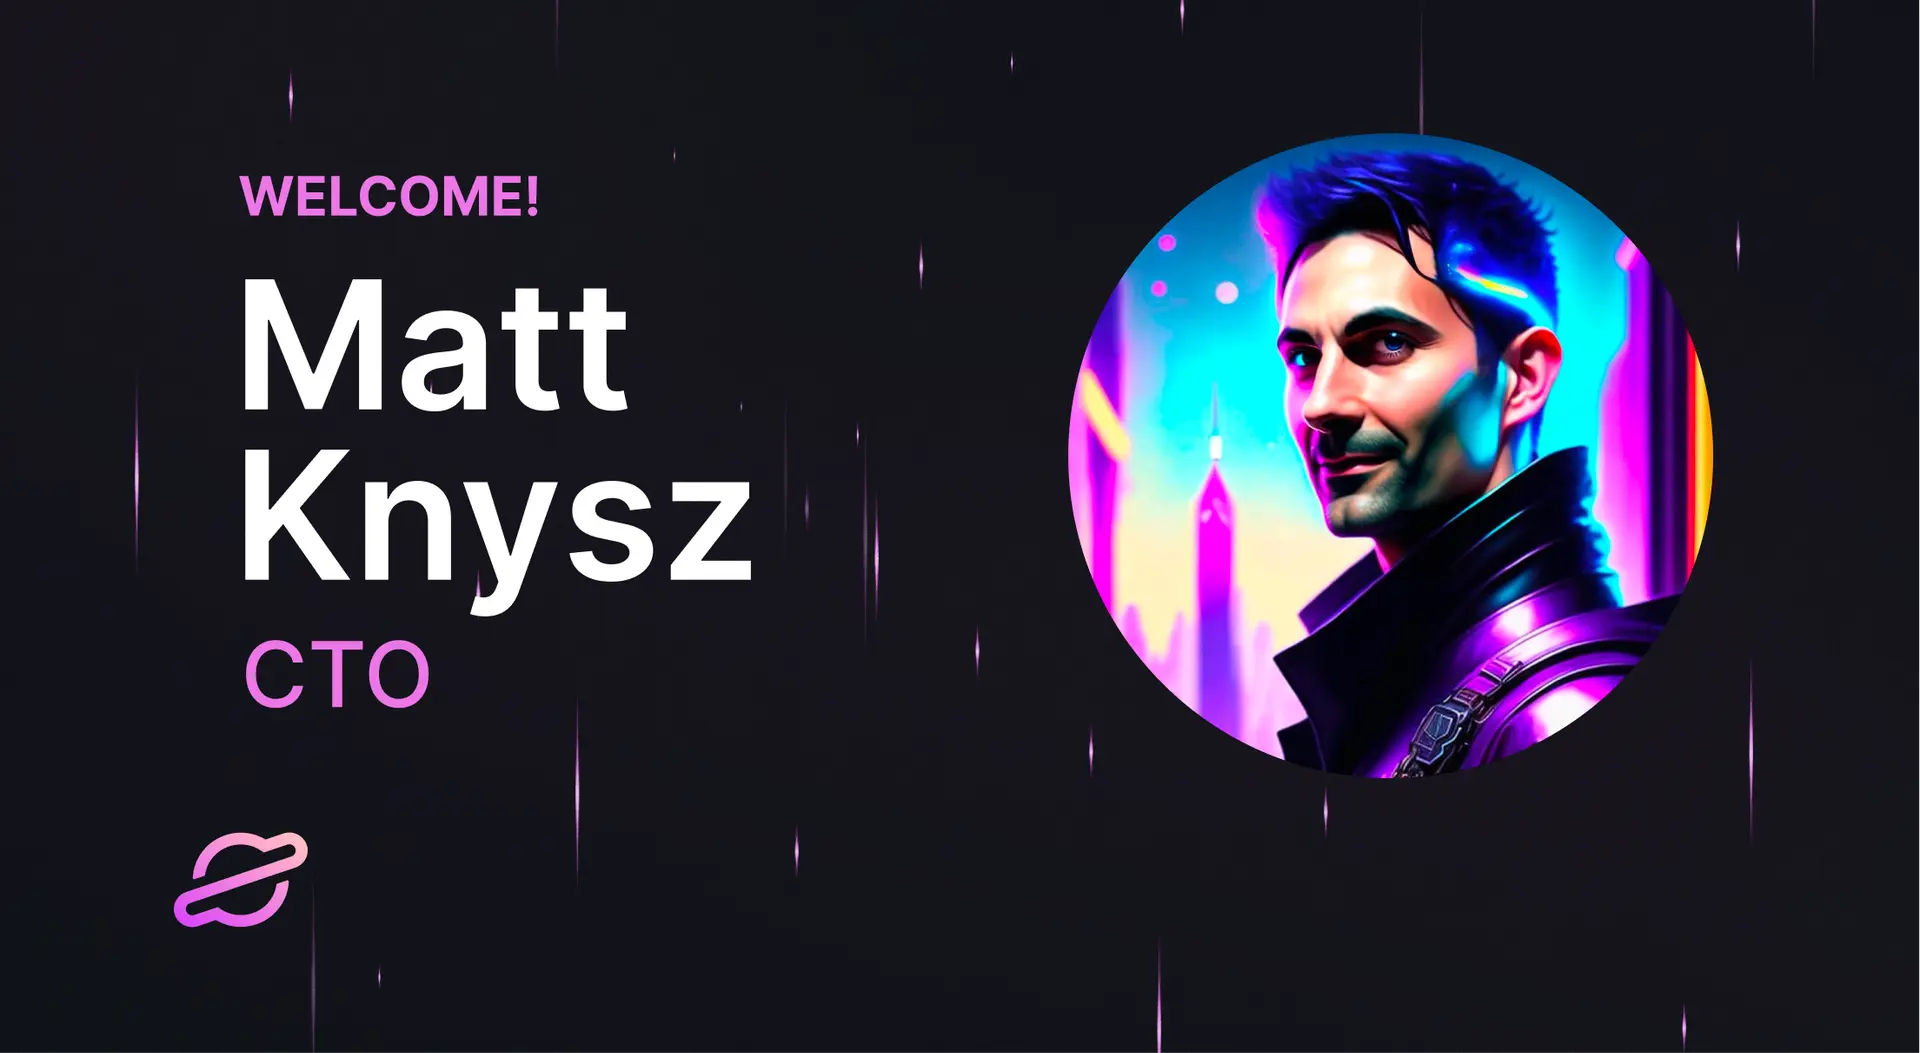 Welcome Matt Knysz our new CTO to Advance No-Chain Vision